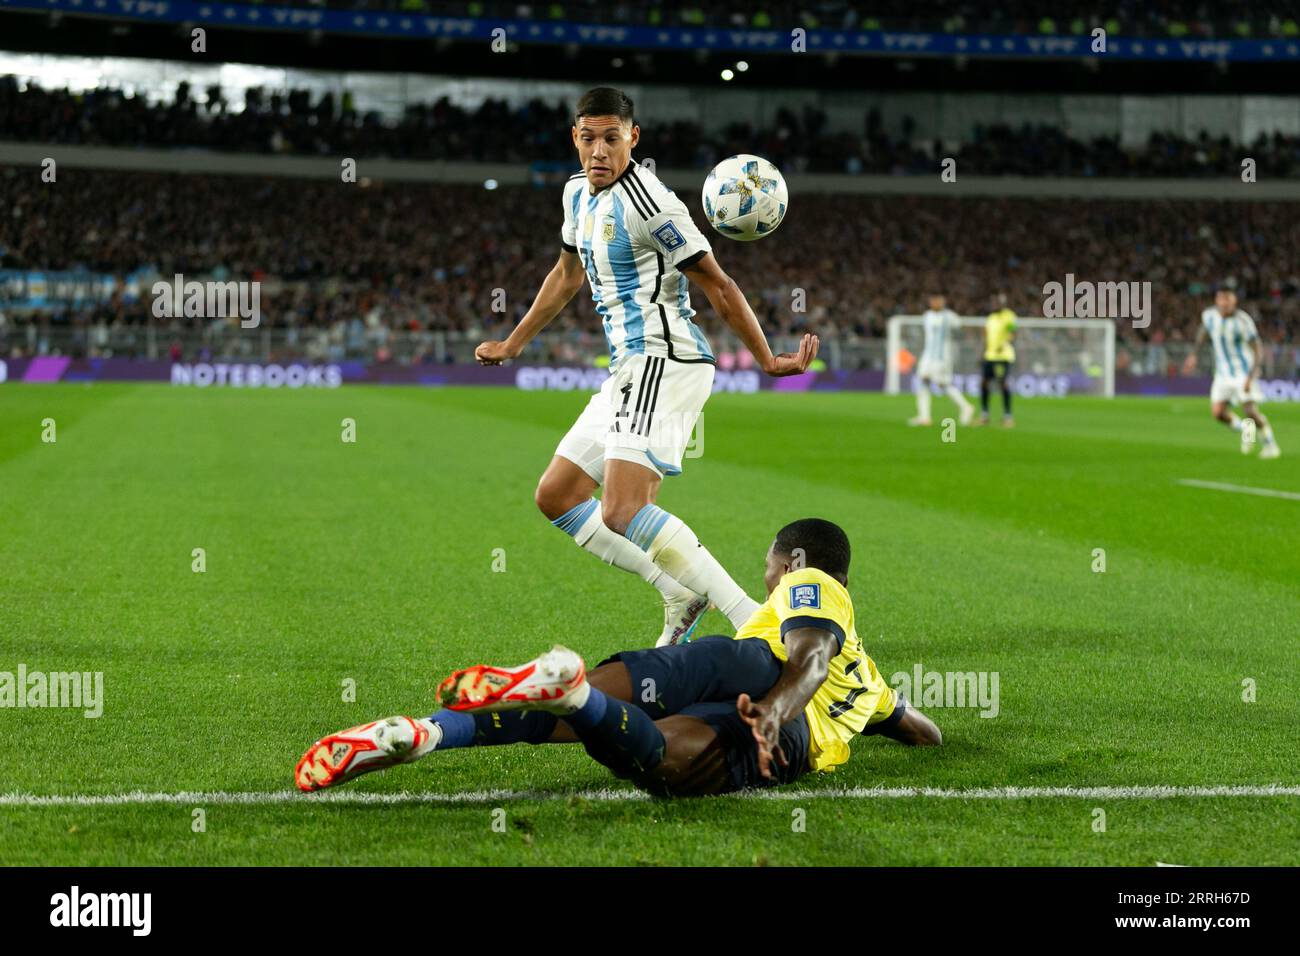 Buenos Aires, Argentina. 08th Sep, 2023. BUENOS AIRES, ARGENTINA - SEPTEMBER 7: Nahuel Molina of Argentina in action during the FIFA World Cup 2026 Qualifier match between Argentina and Ecuador at Estadio Más Monumental Antonio Vespucio Liberti on September 07, 2023 in Buenos Aires, Argentina. (Photo by Florencia Tan Jun/Pximages) Credit: Px Images/Alamy Live News Stock Photo